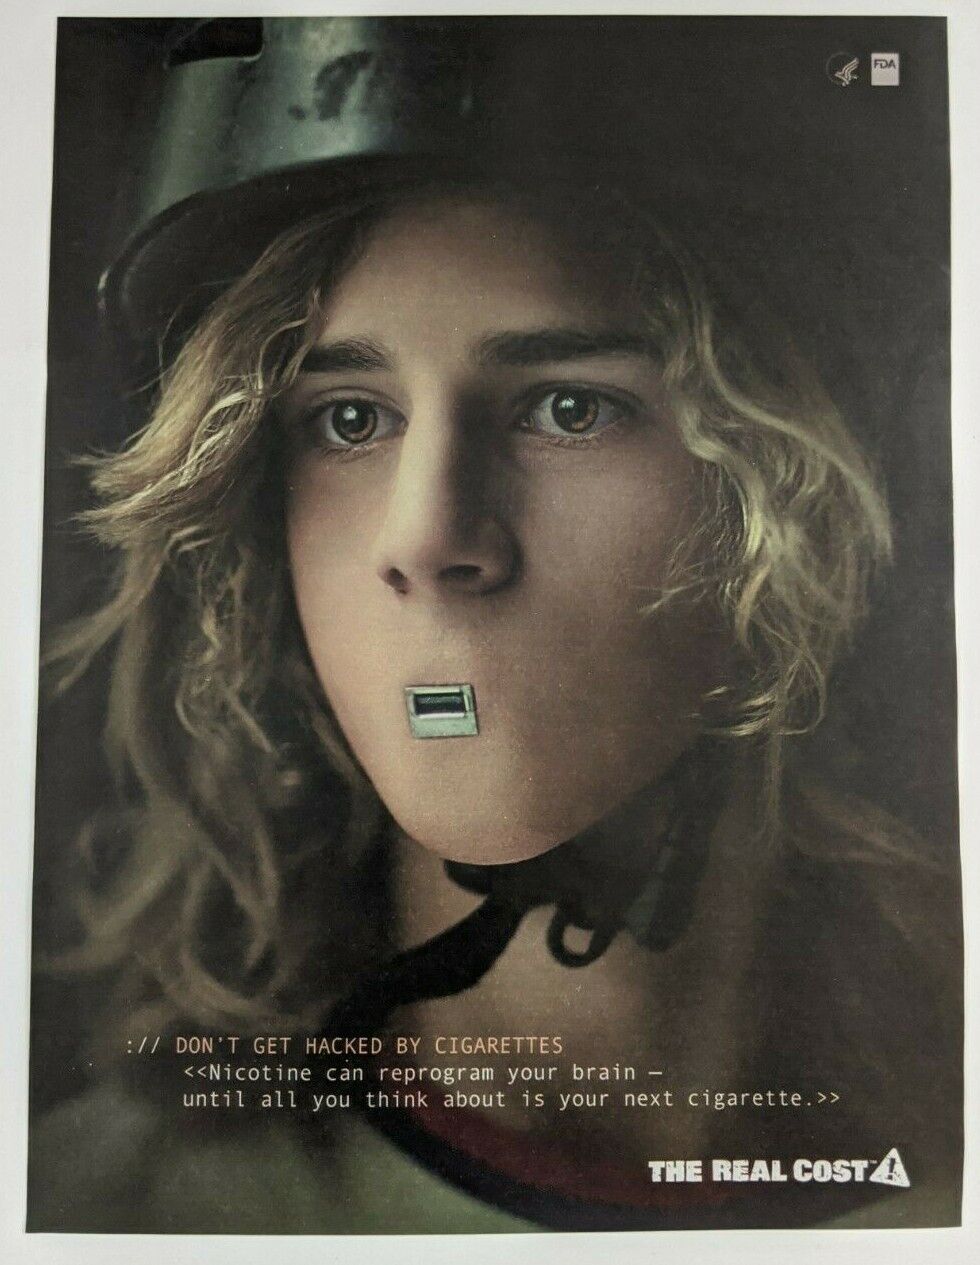 The Real Cost Anti-Smoking Print Ad Poster Art PROMO FDA Hacked Cigarettes